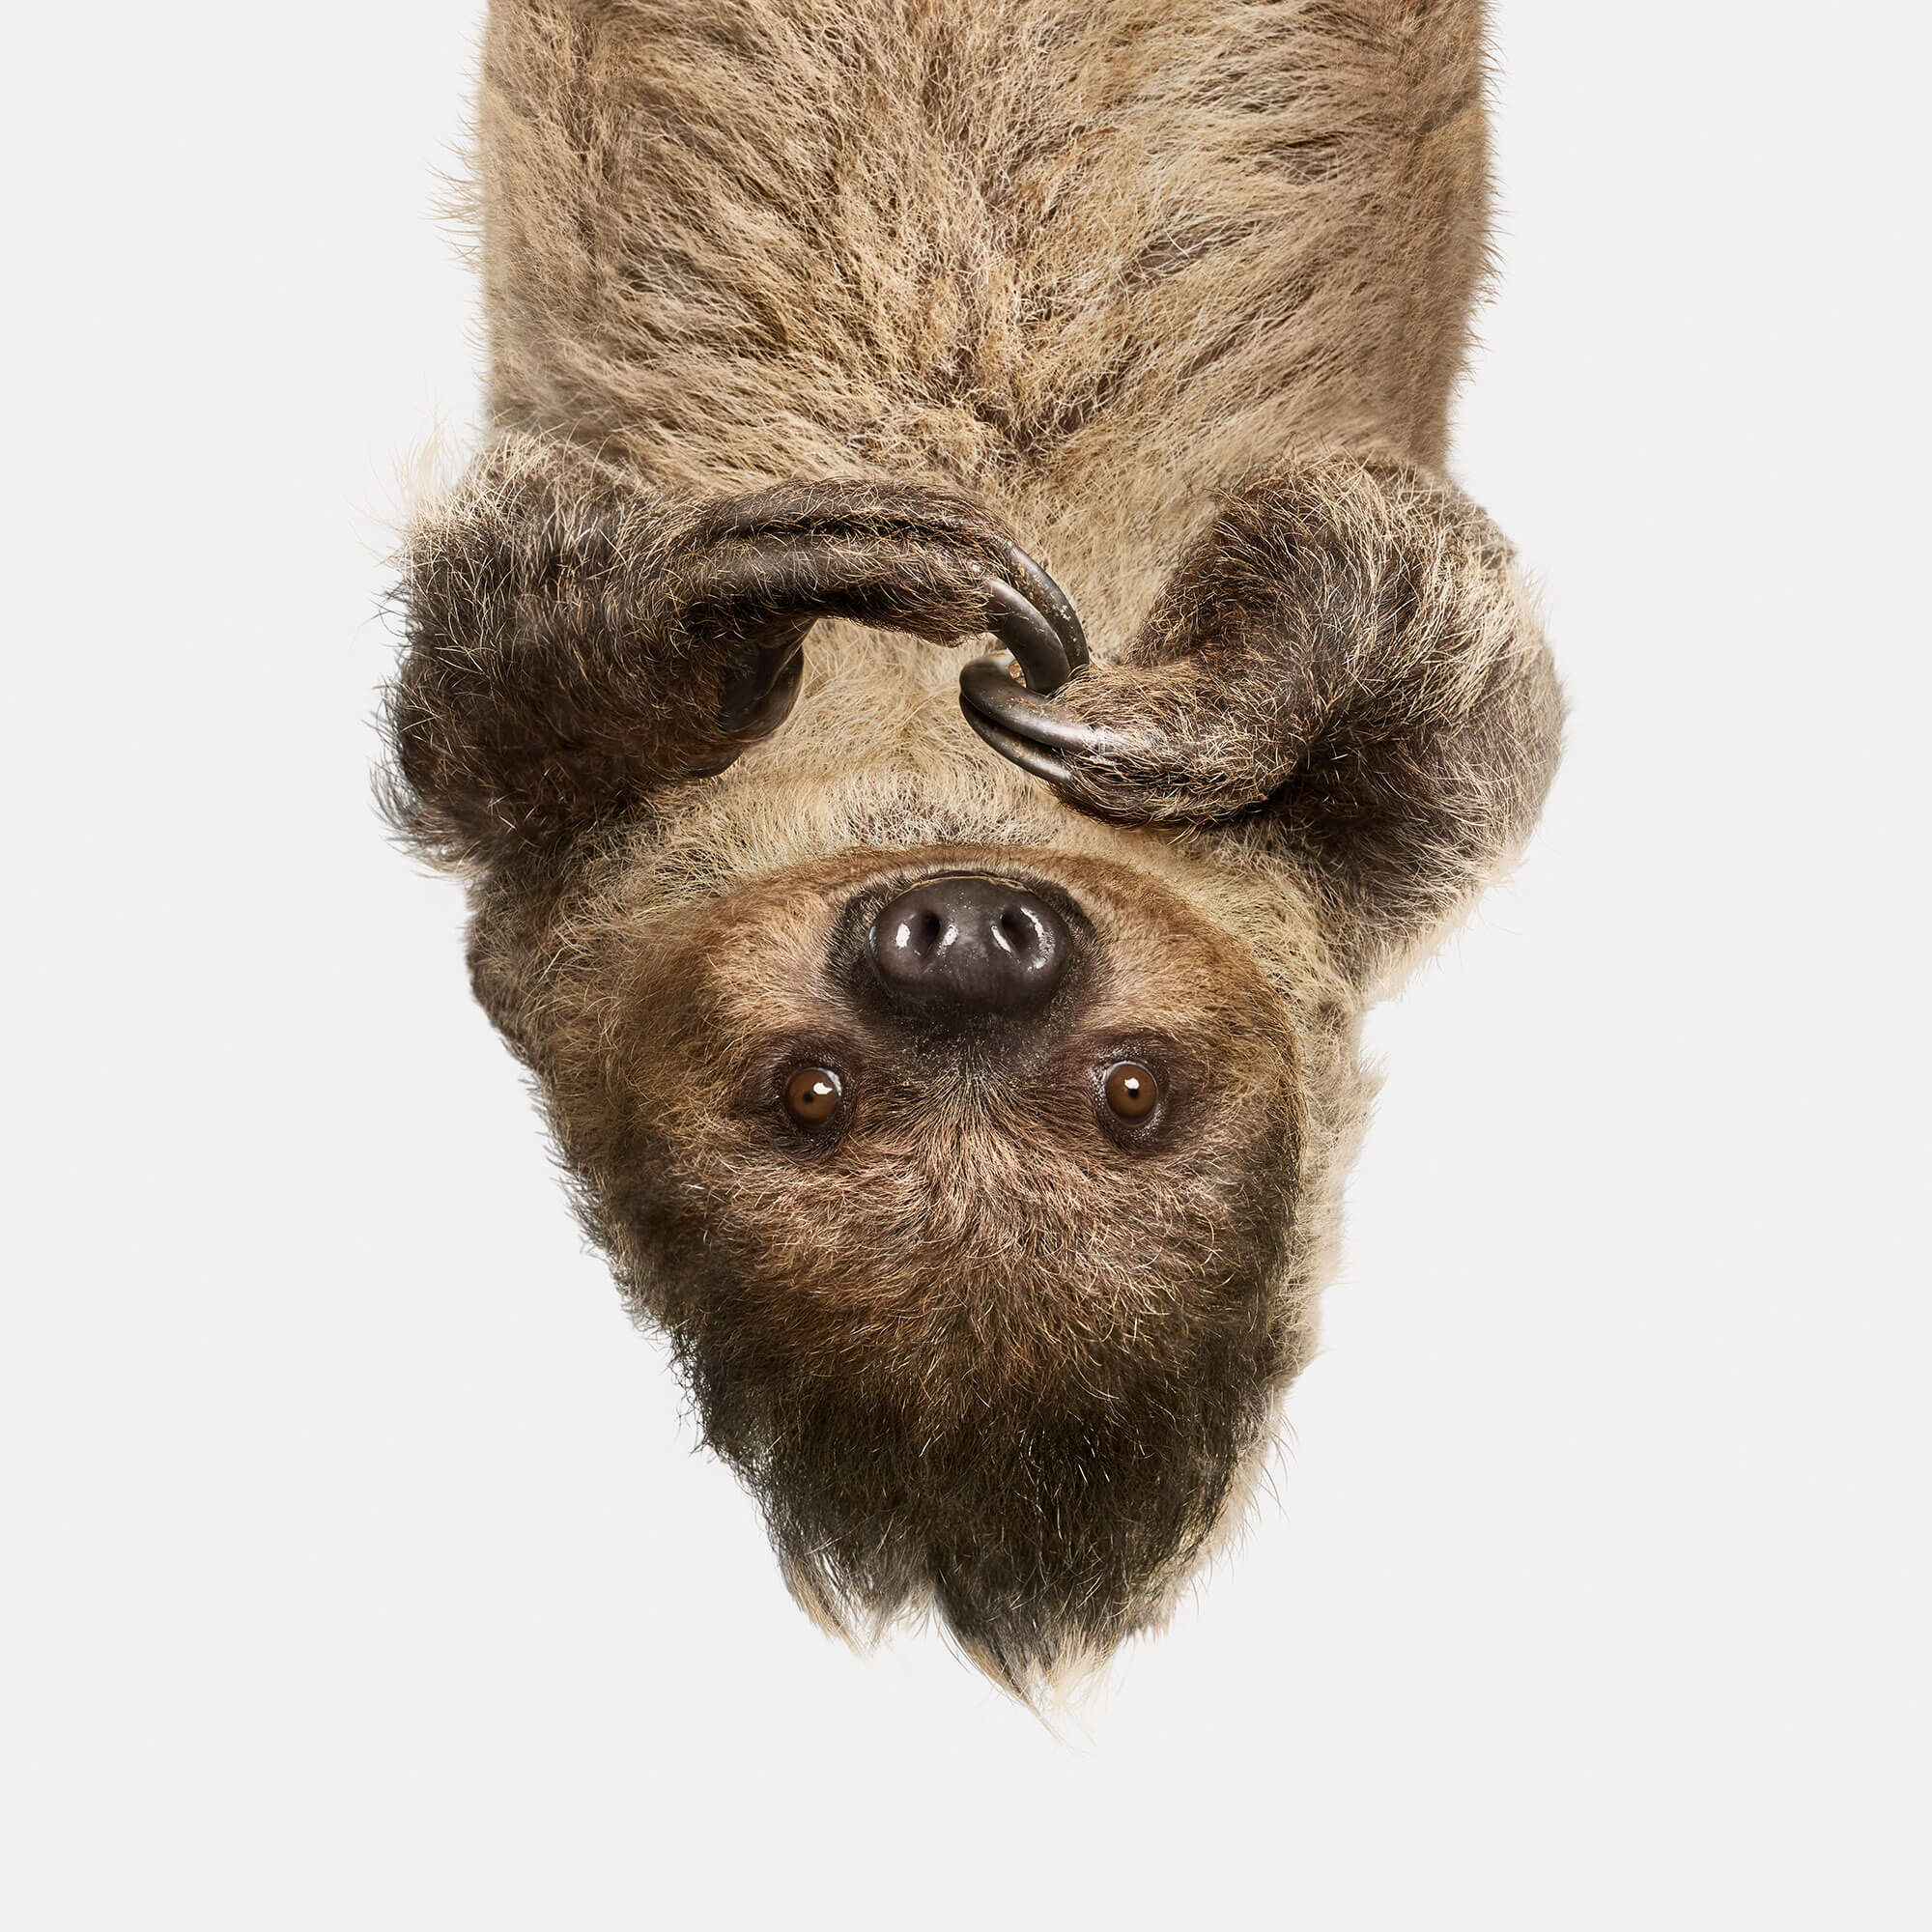 Image of Upside Down Sloth, Perry